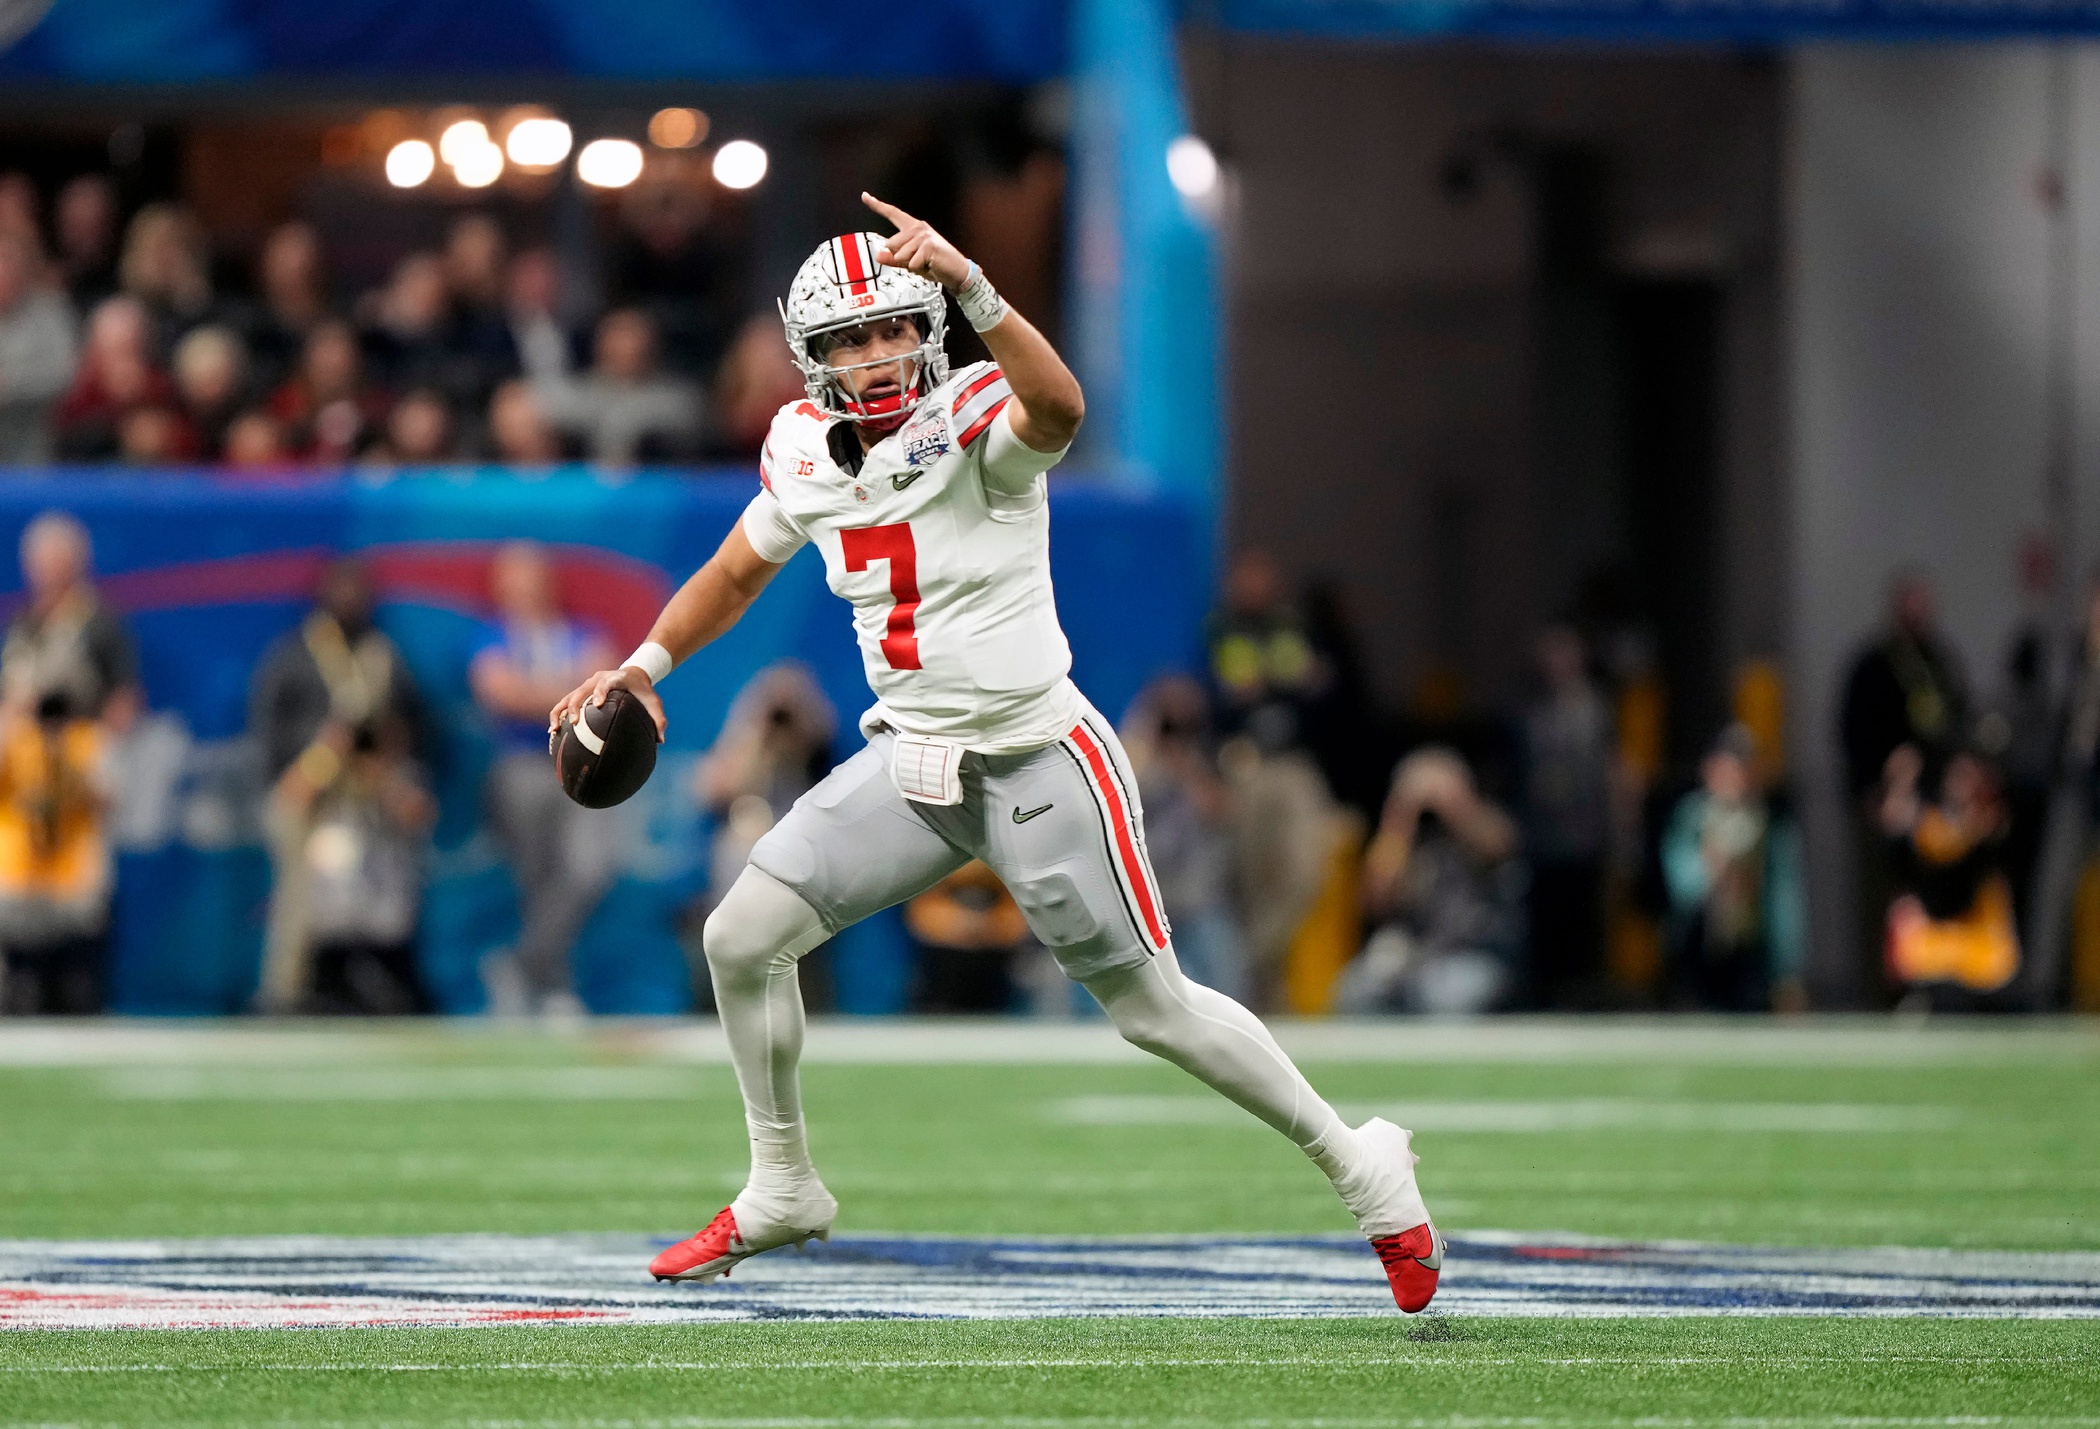 NEW Chicago Bears Mock Draft: This 2022 NFL Mock Draft HELPS Justin Fields  & The Bears Offense 